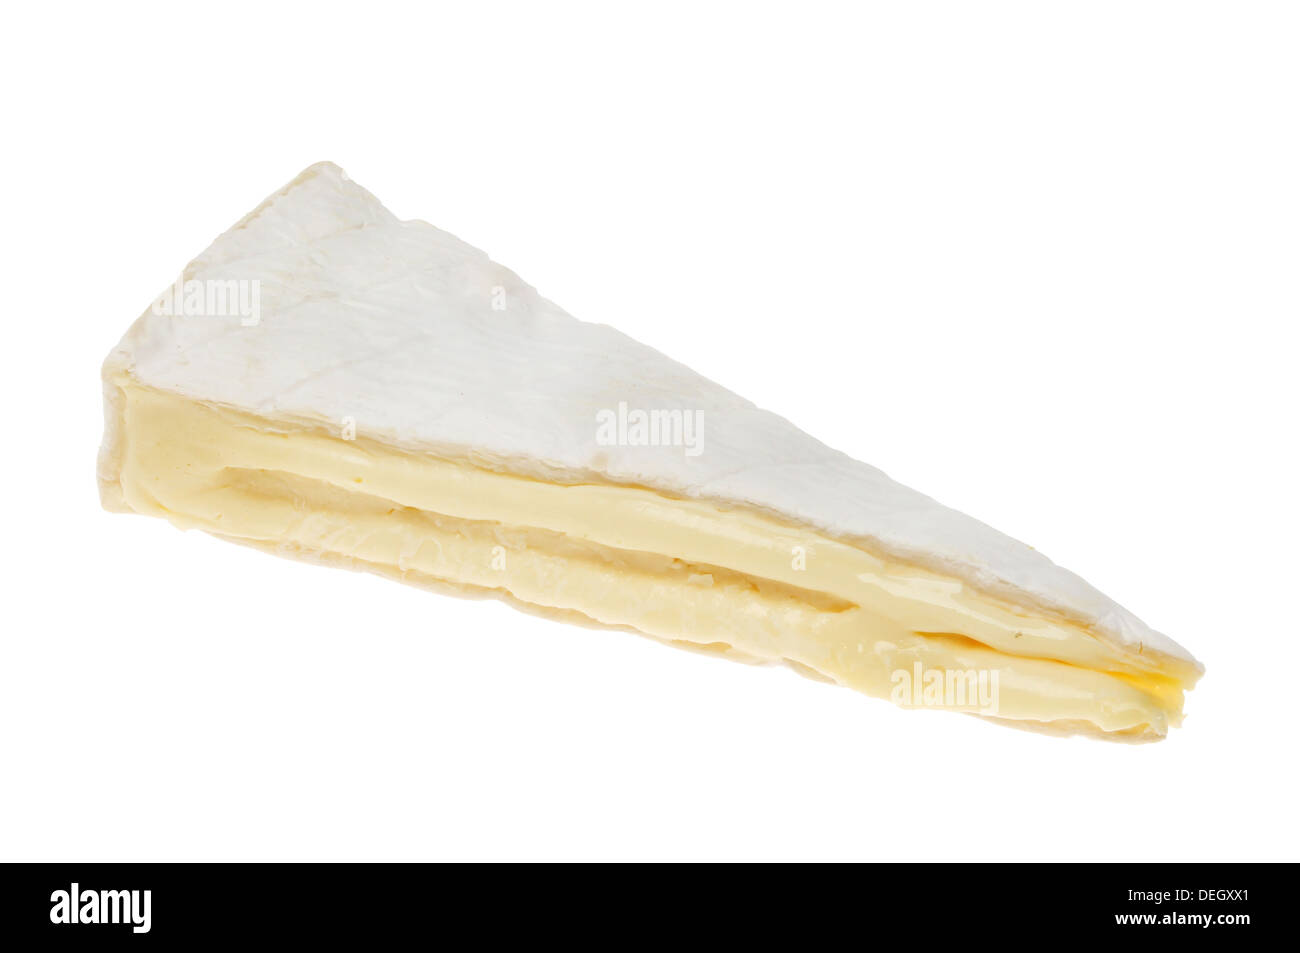 Wedge of ripe brie cheese isolated against white Stock Photo